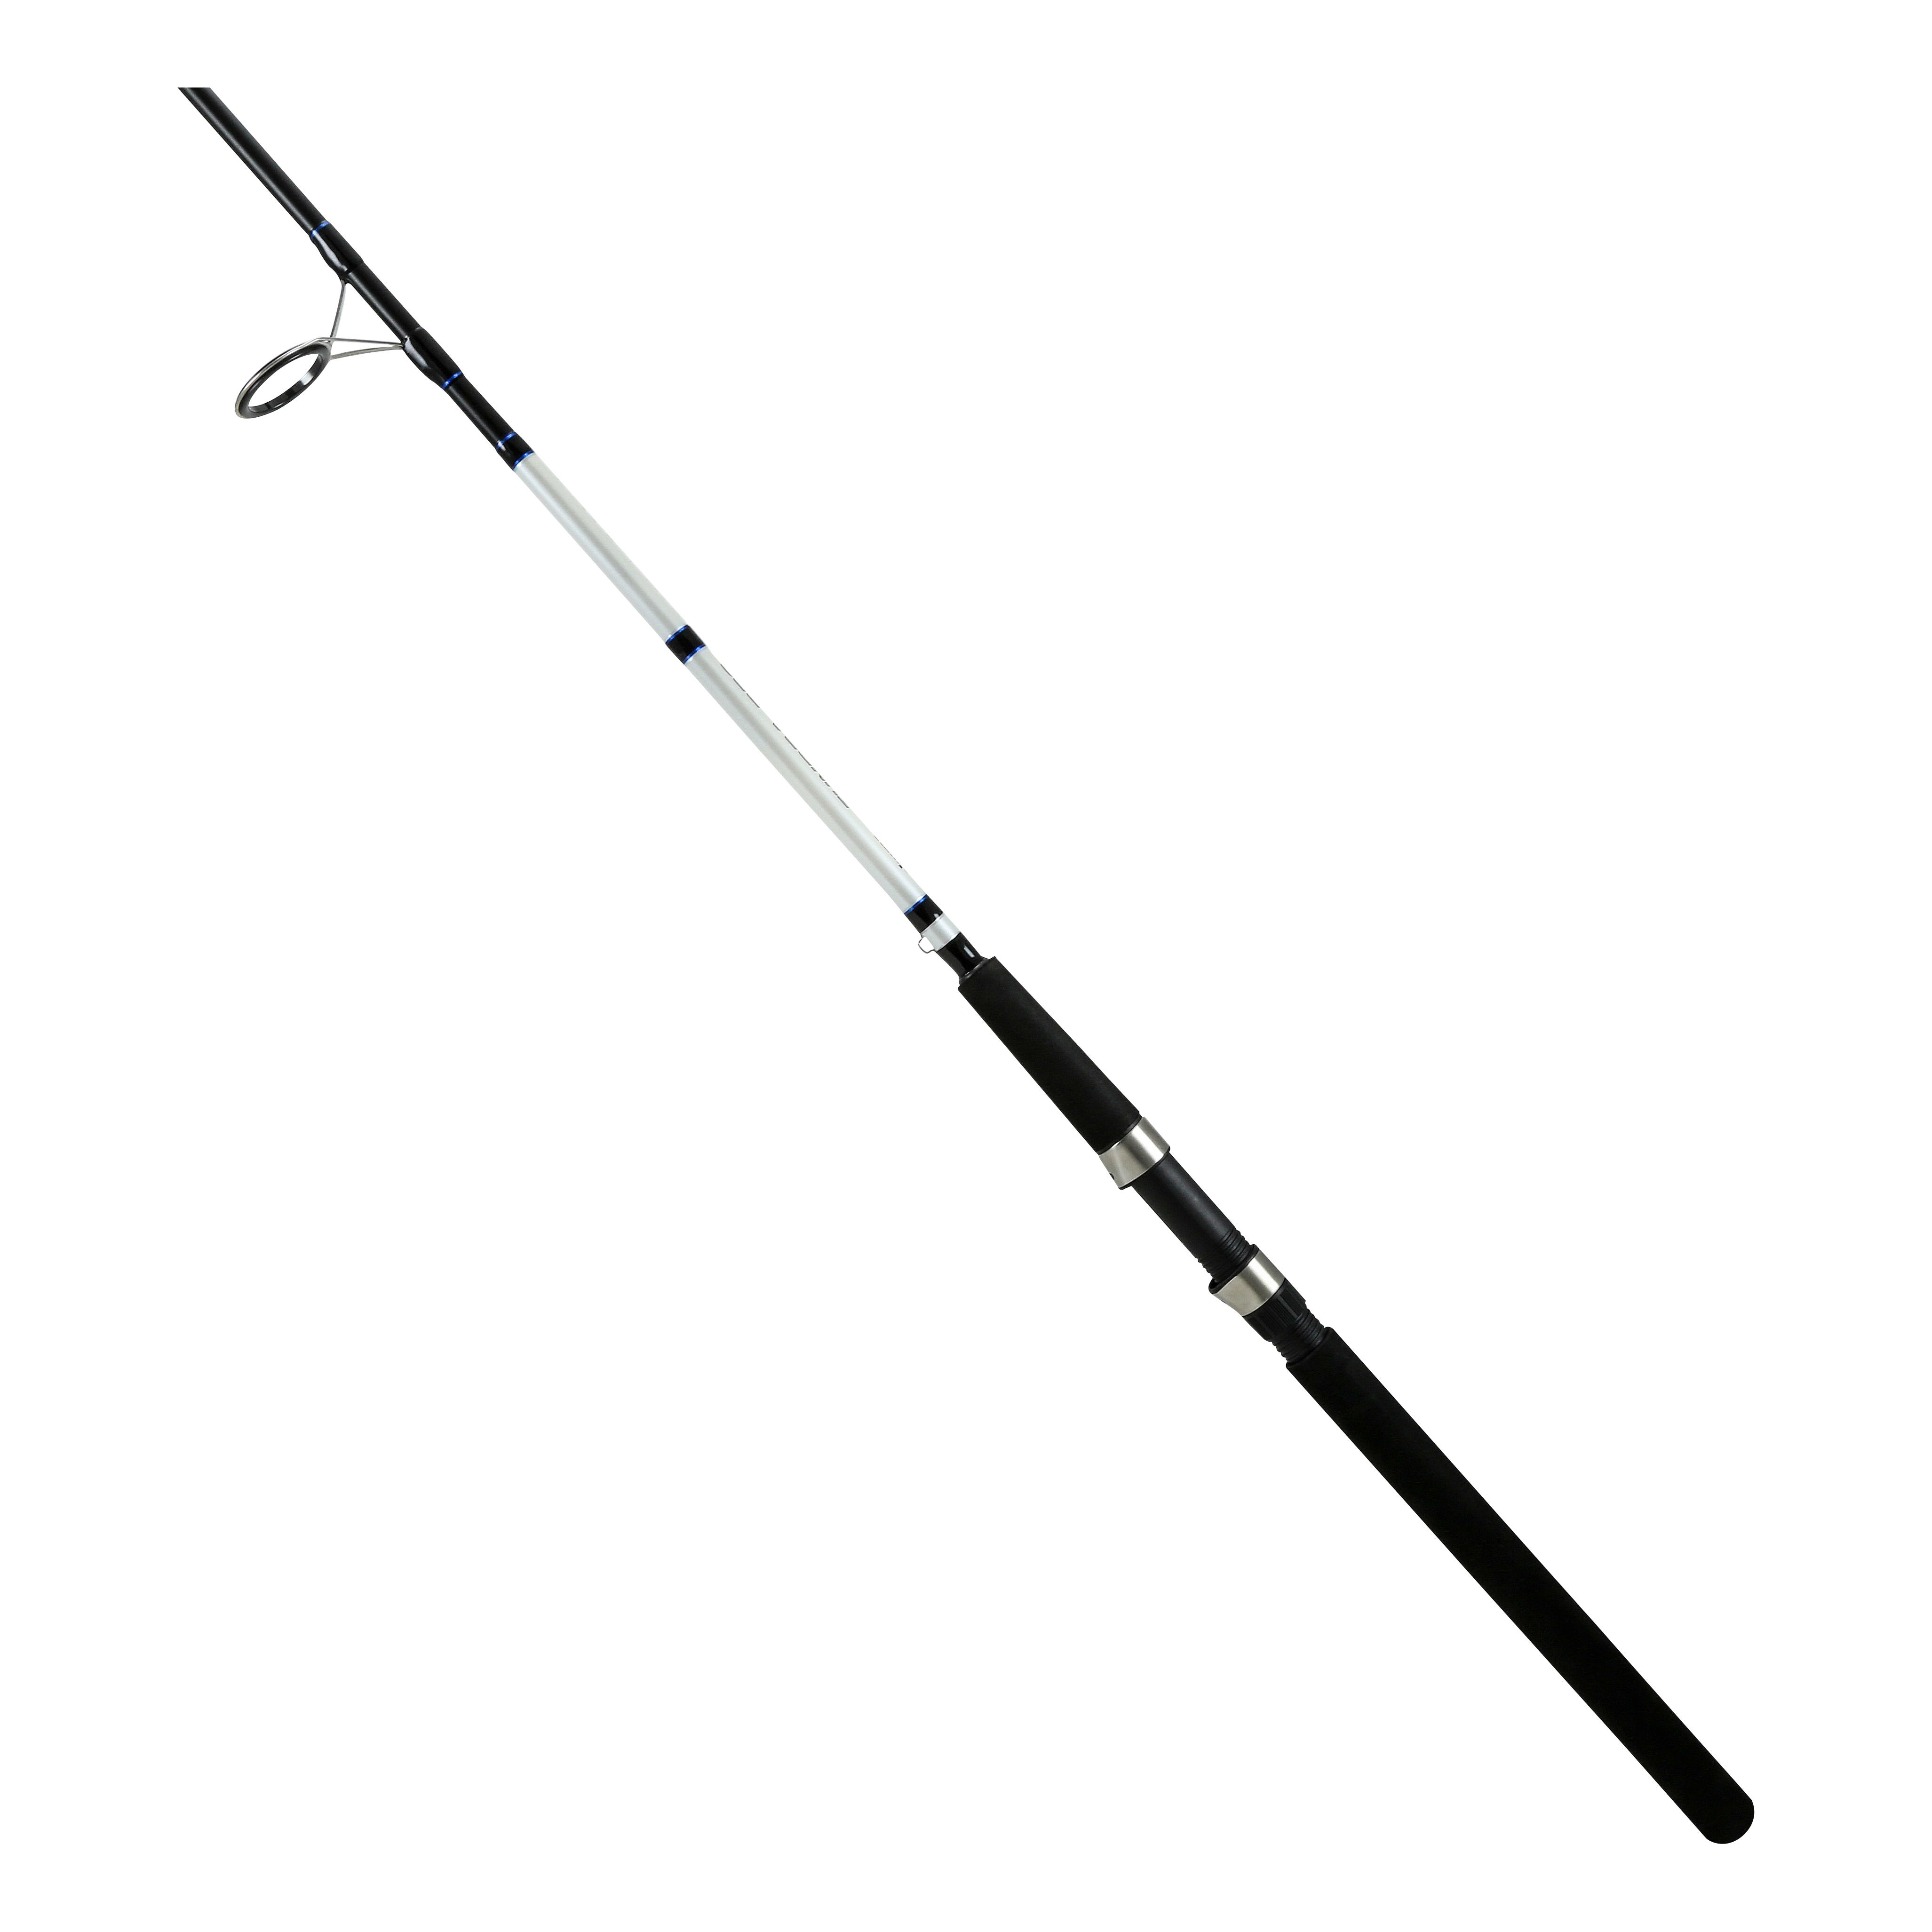 Topline Tackle Fishing Pole with Stainless Steel Spinning Fishing